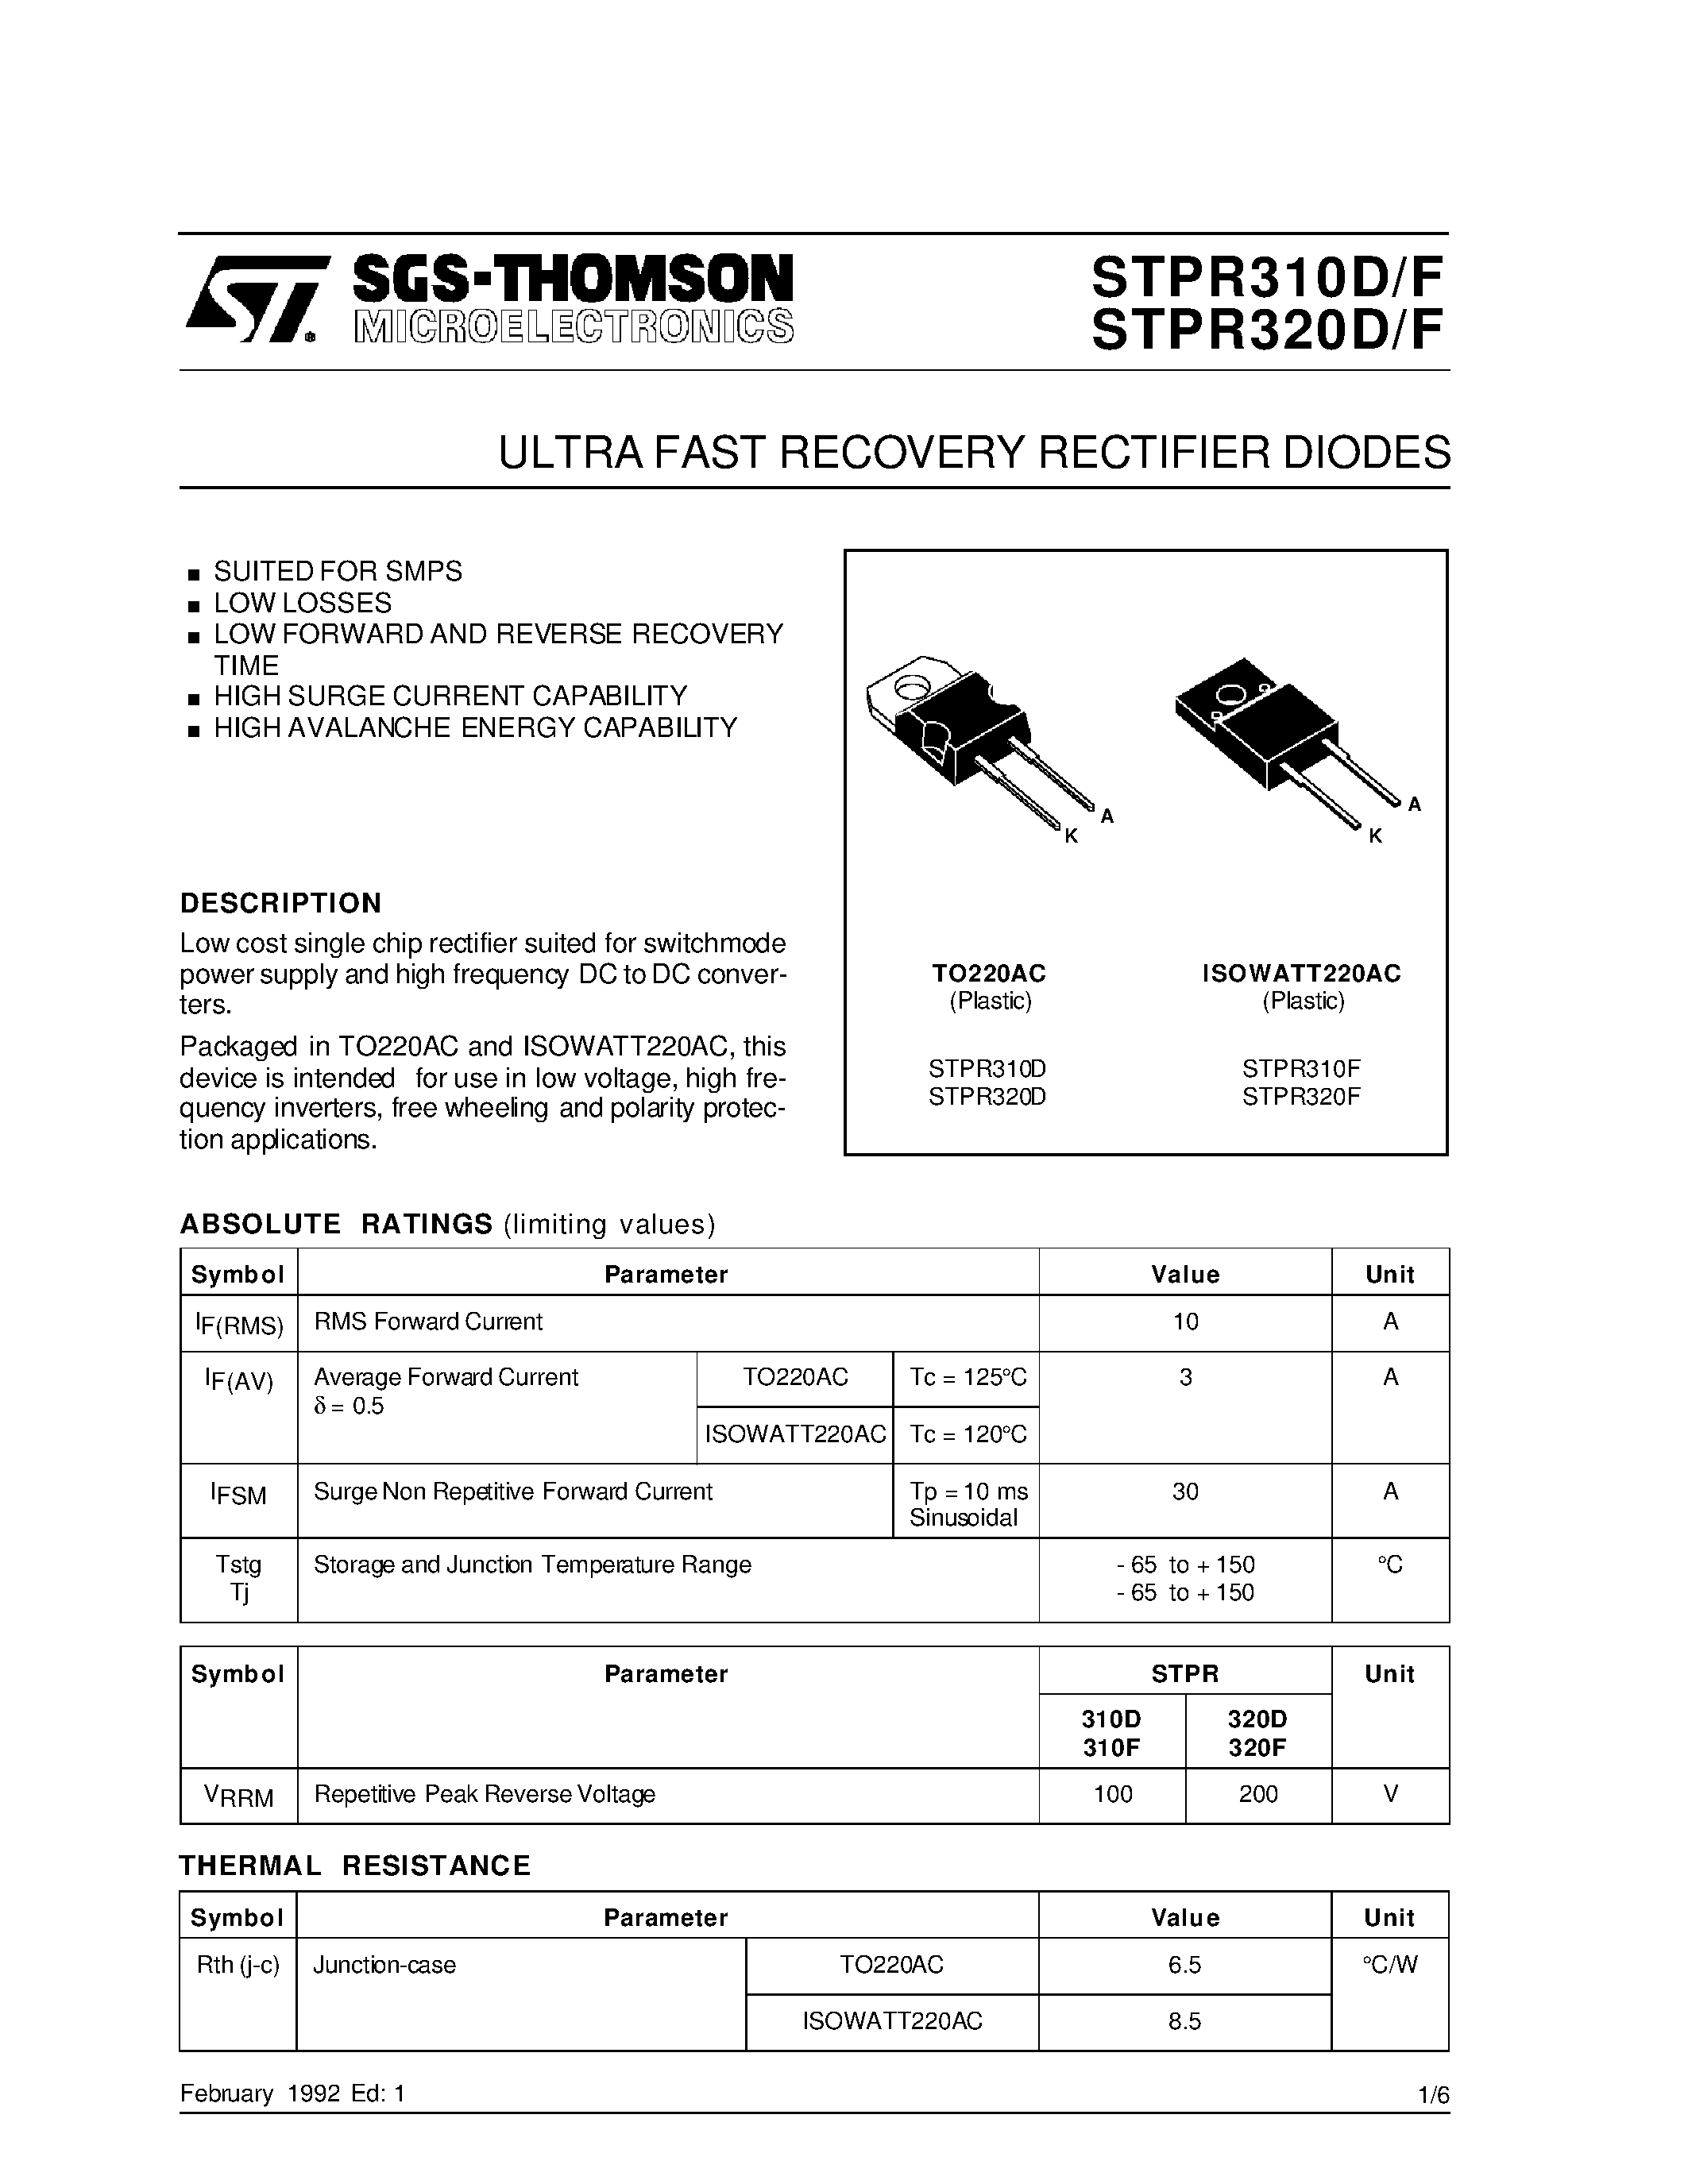 Datasheet STPR310D - (STPR310D/F - STPR320D/F) ULTRA FAST RECOVERY RECTIFIER DIODES page 1